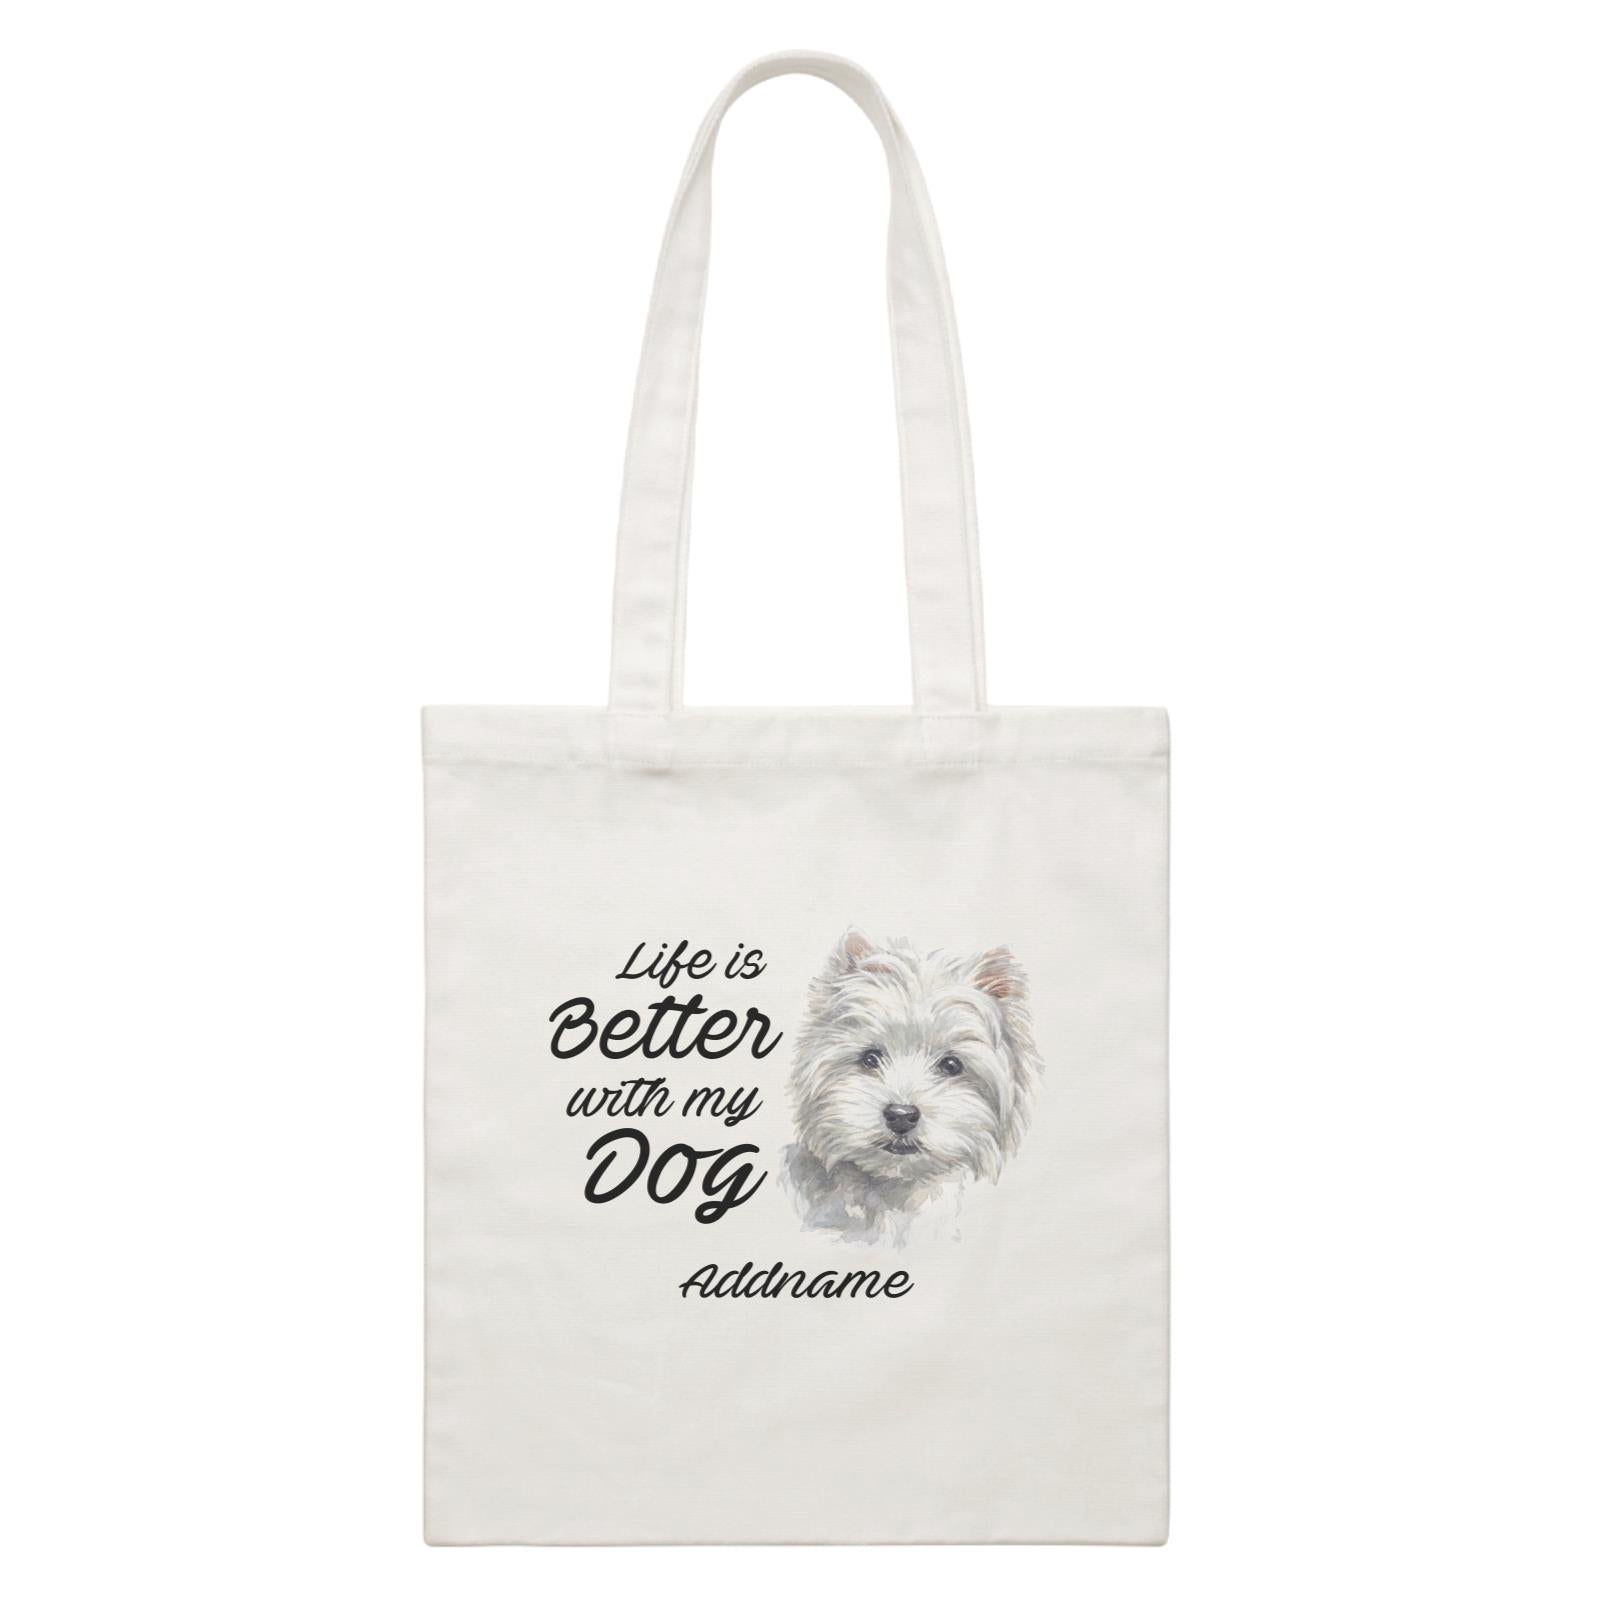 Watercolor Life is Better With My Dog West Highland White Terrier Addname White Canvas Bag